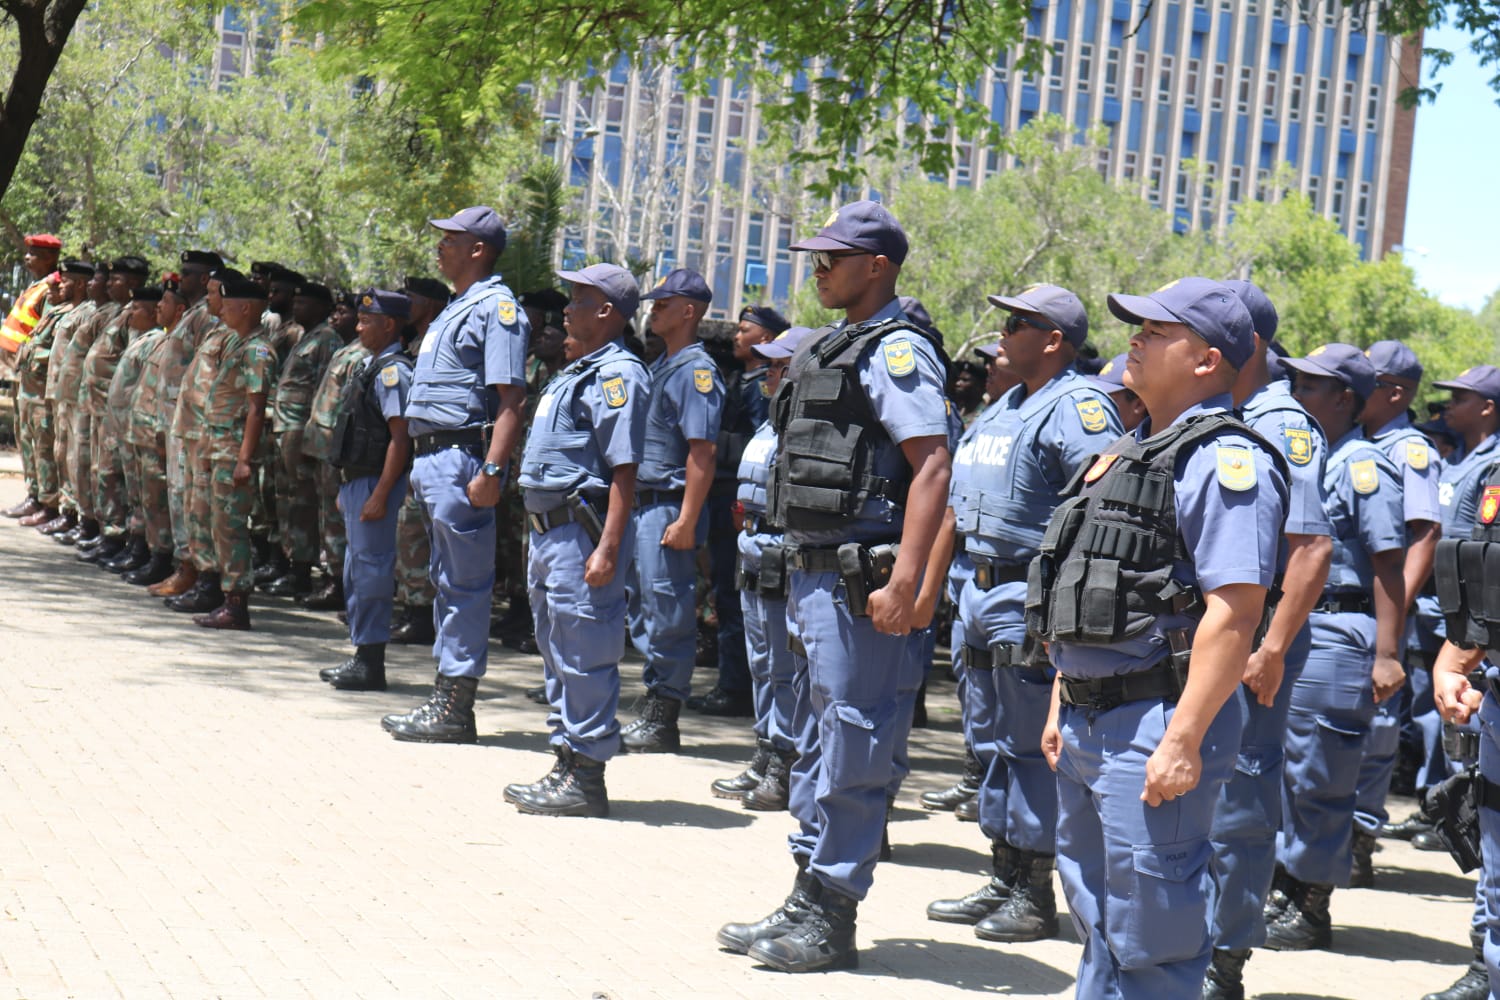 Northern Cape Police deploys more boots on the ground to deal with illicit mining